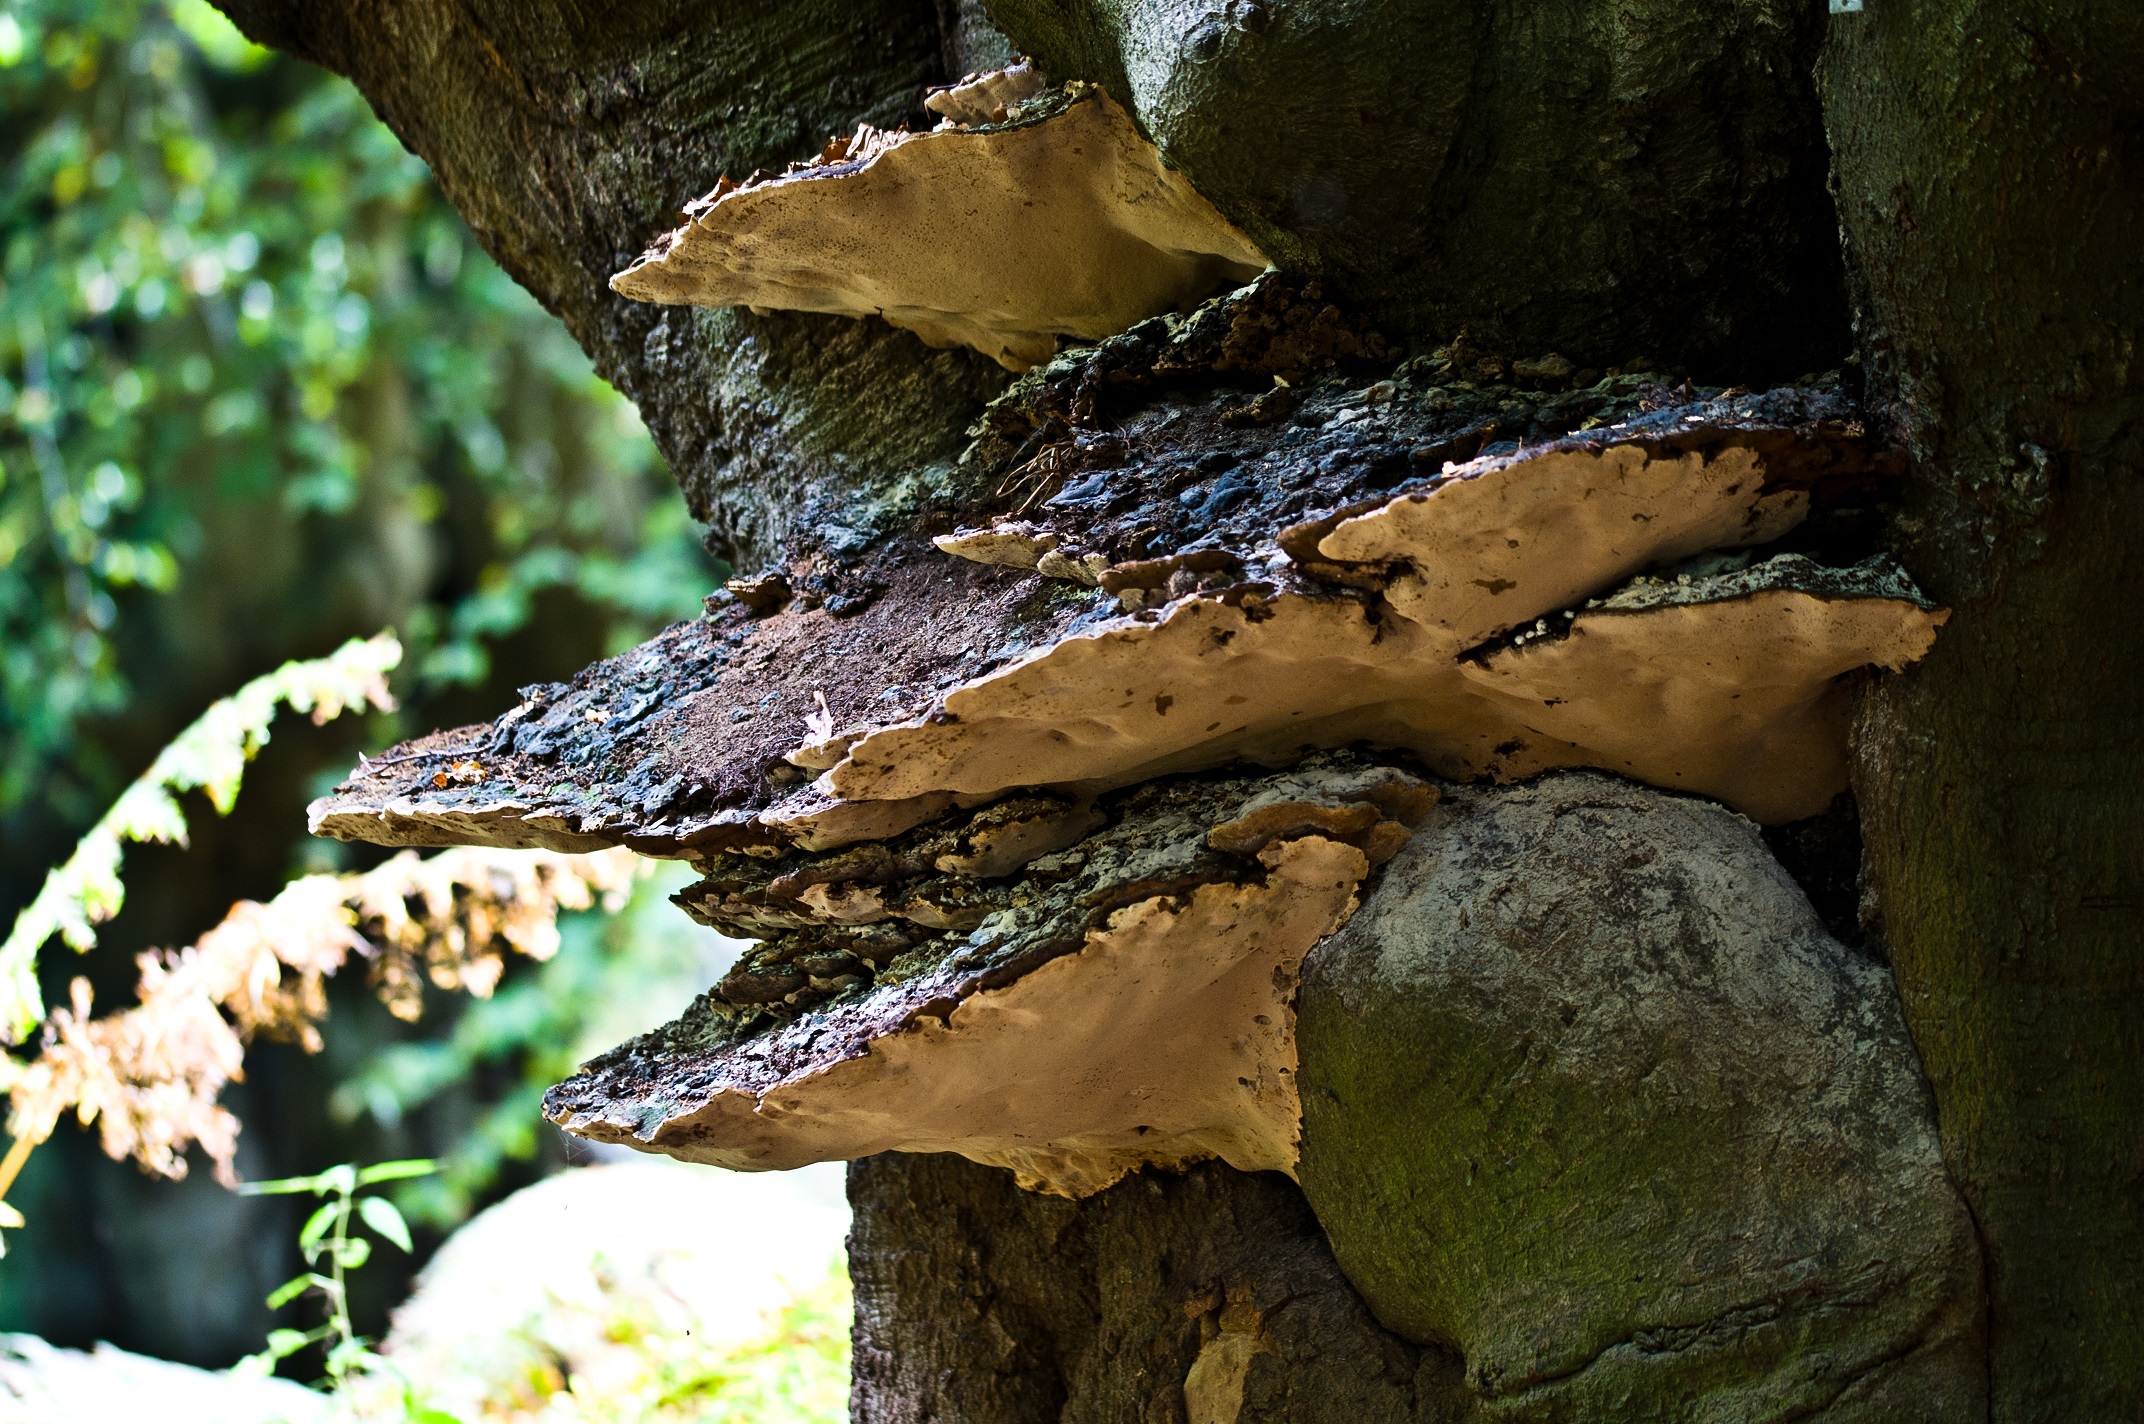 Fungi forms an important part of the ecosystem in the forest (City of London Corporation/PA)